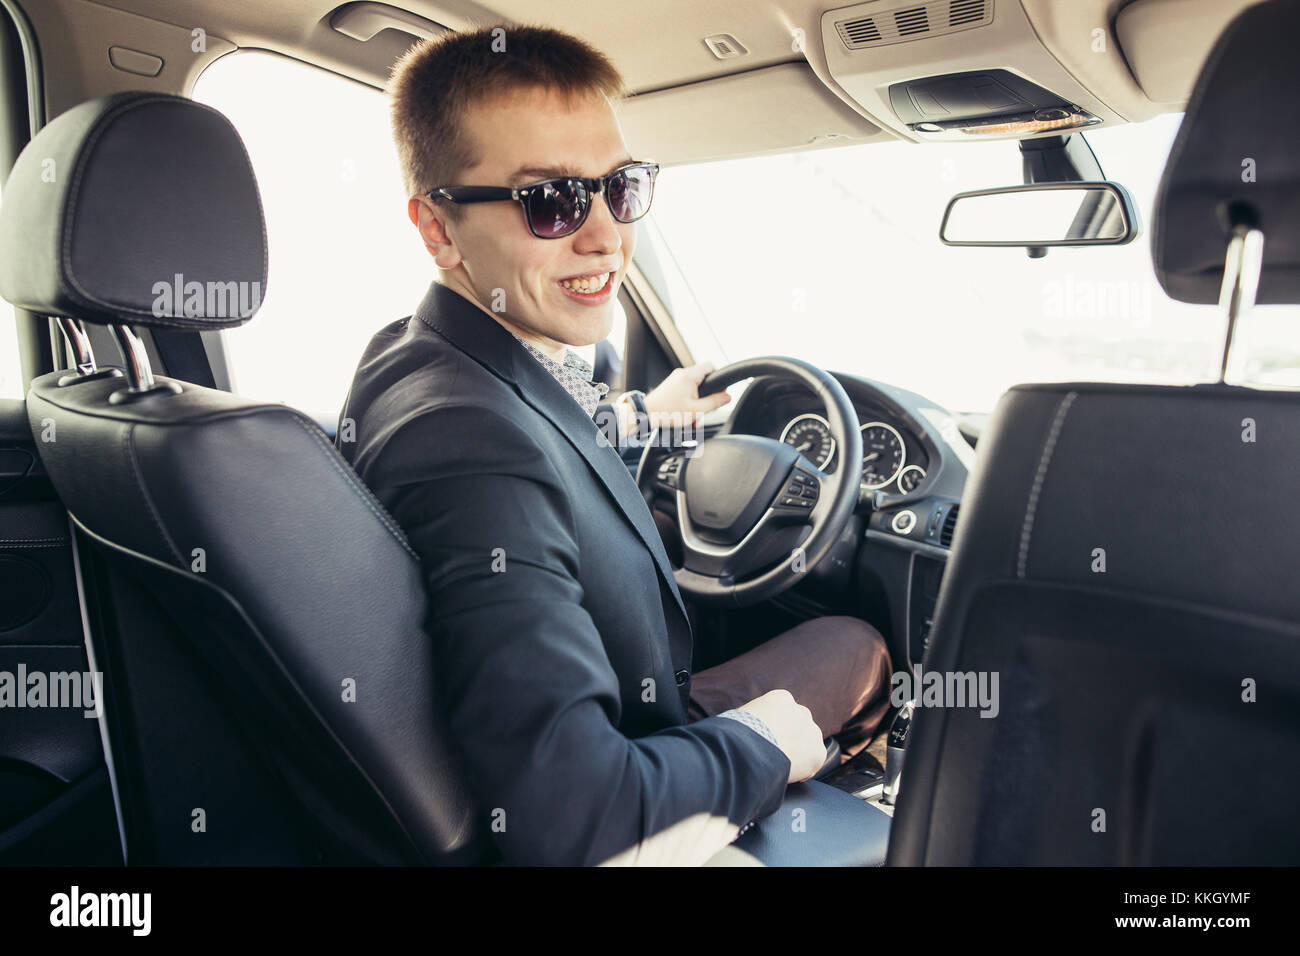 Expensive Mens Accessories Car Stock Photo 563995537